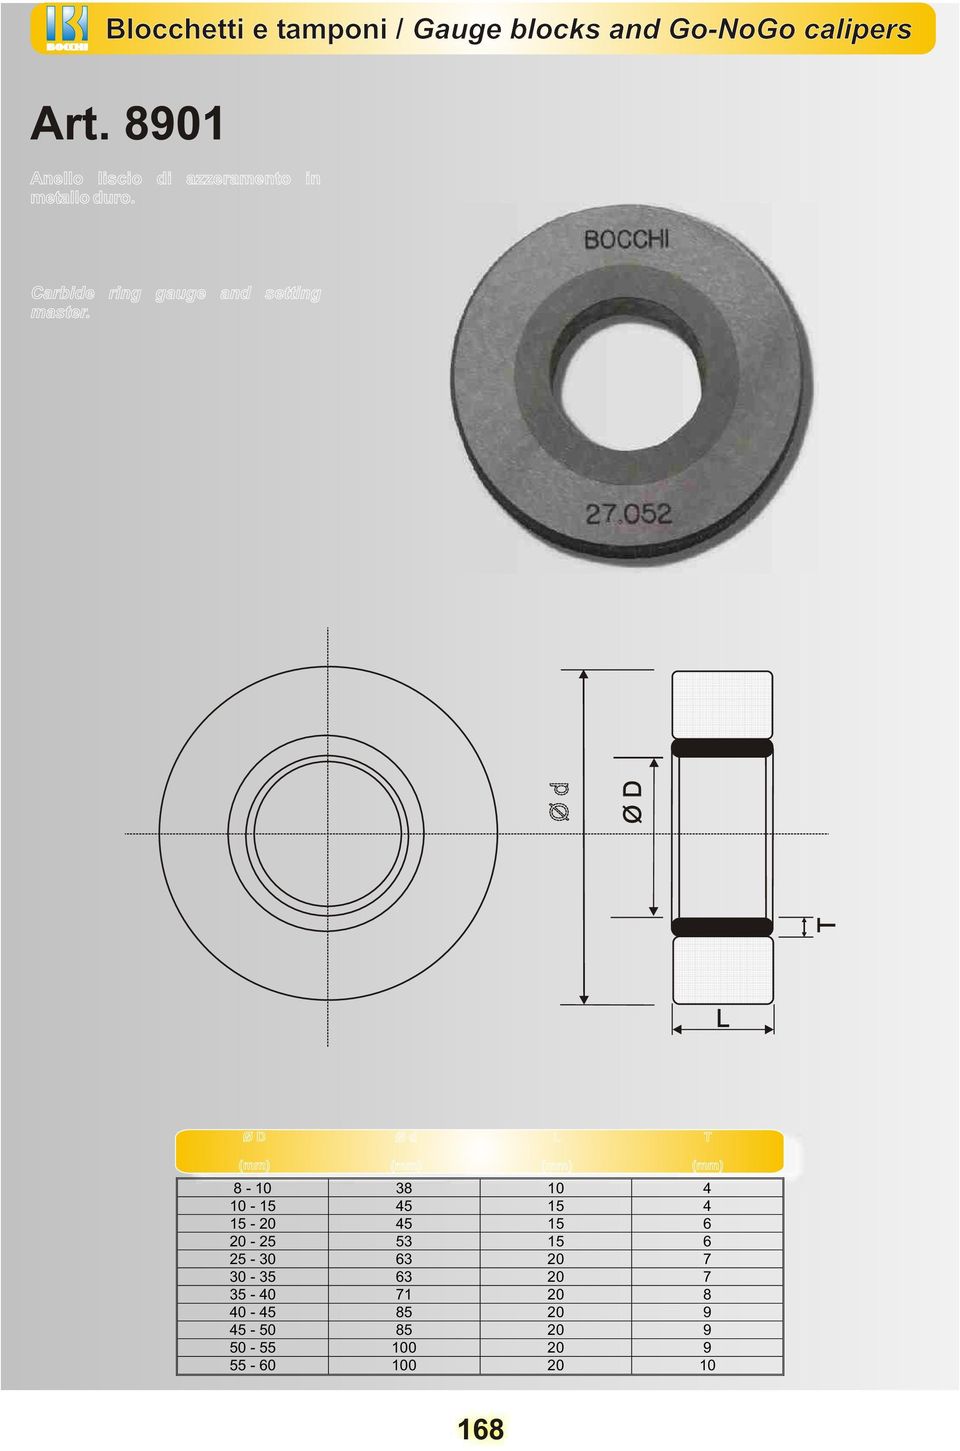 Carbide ring gauge and setting master.